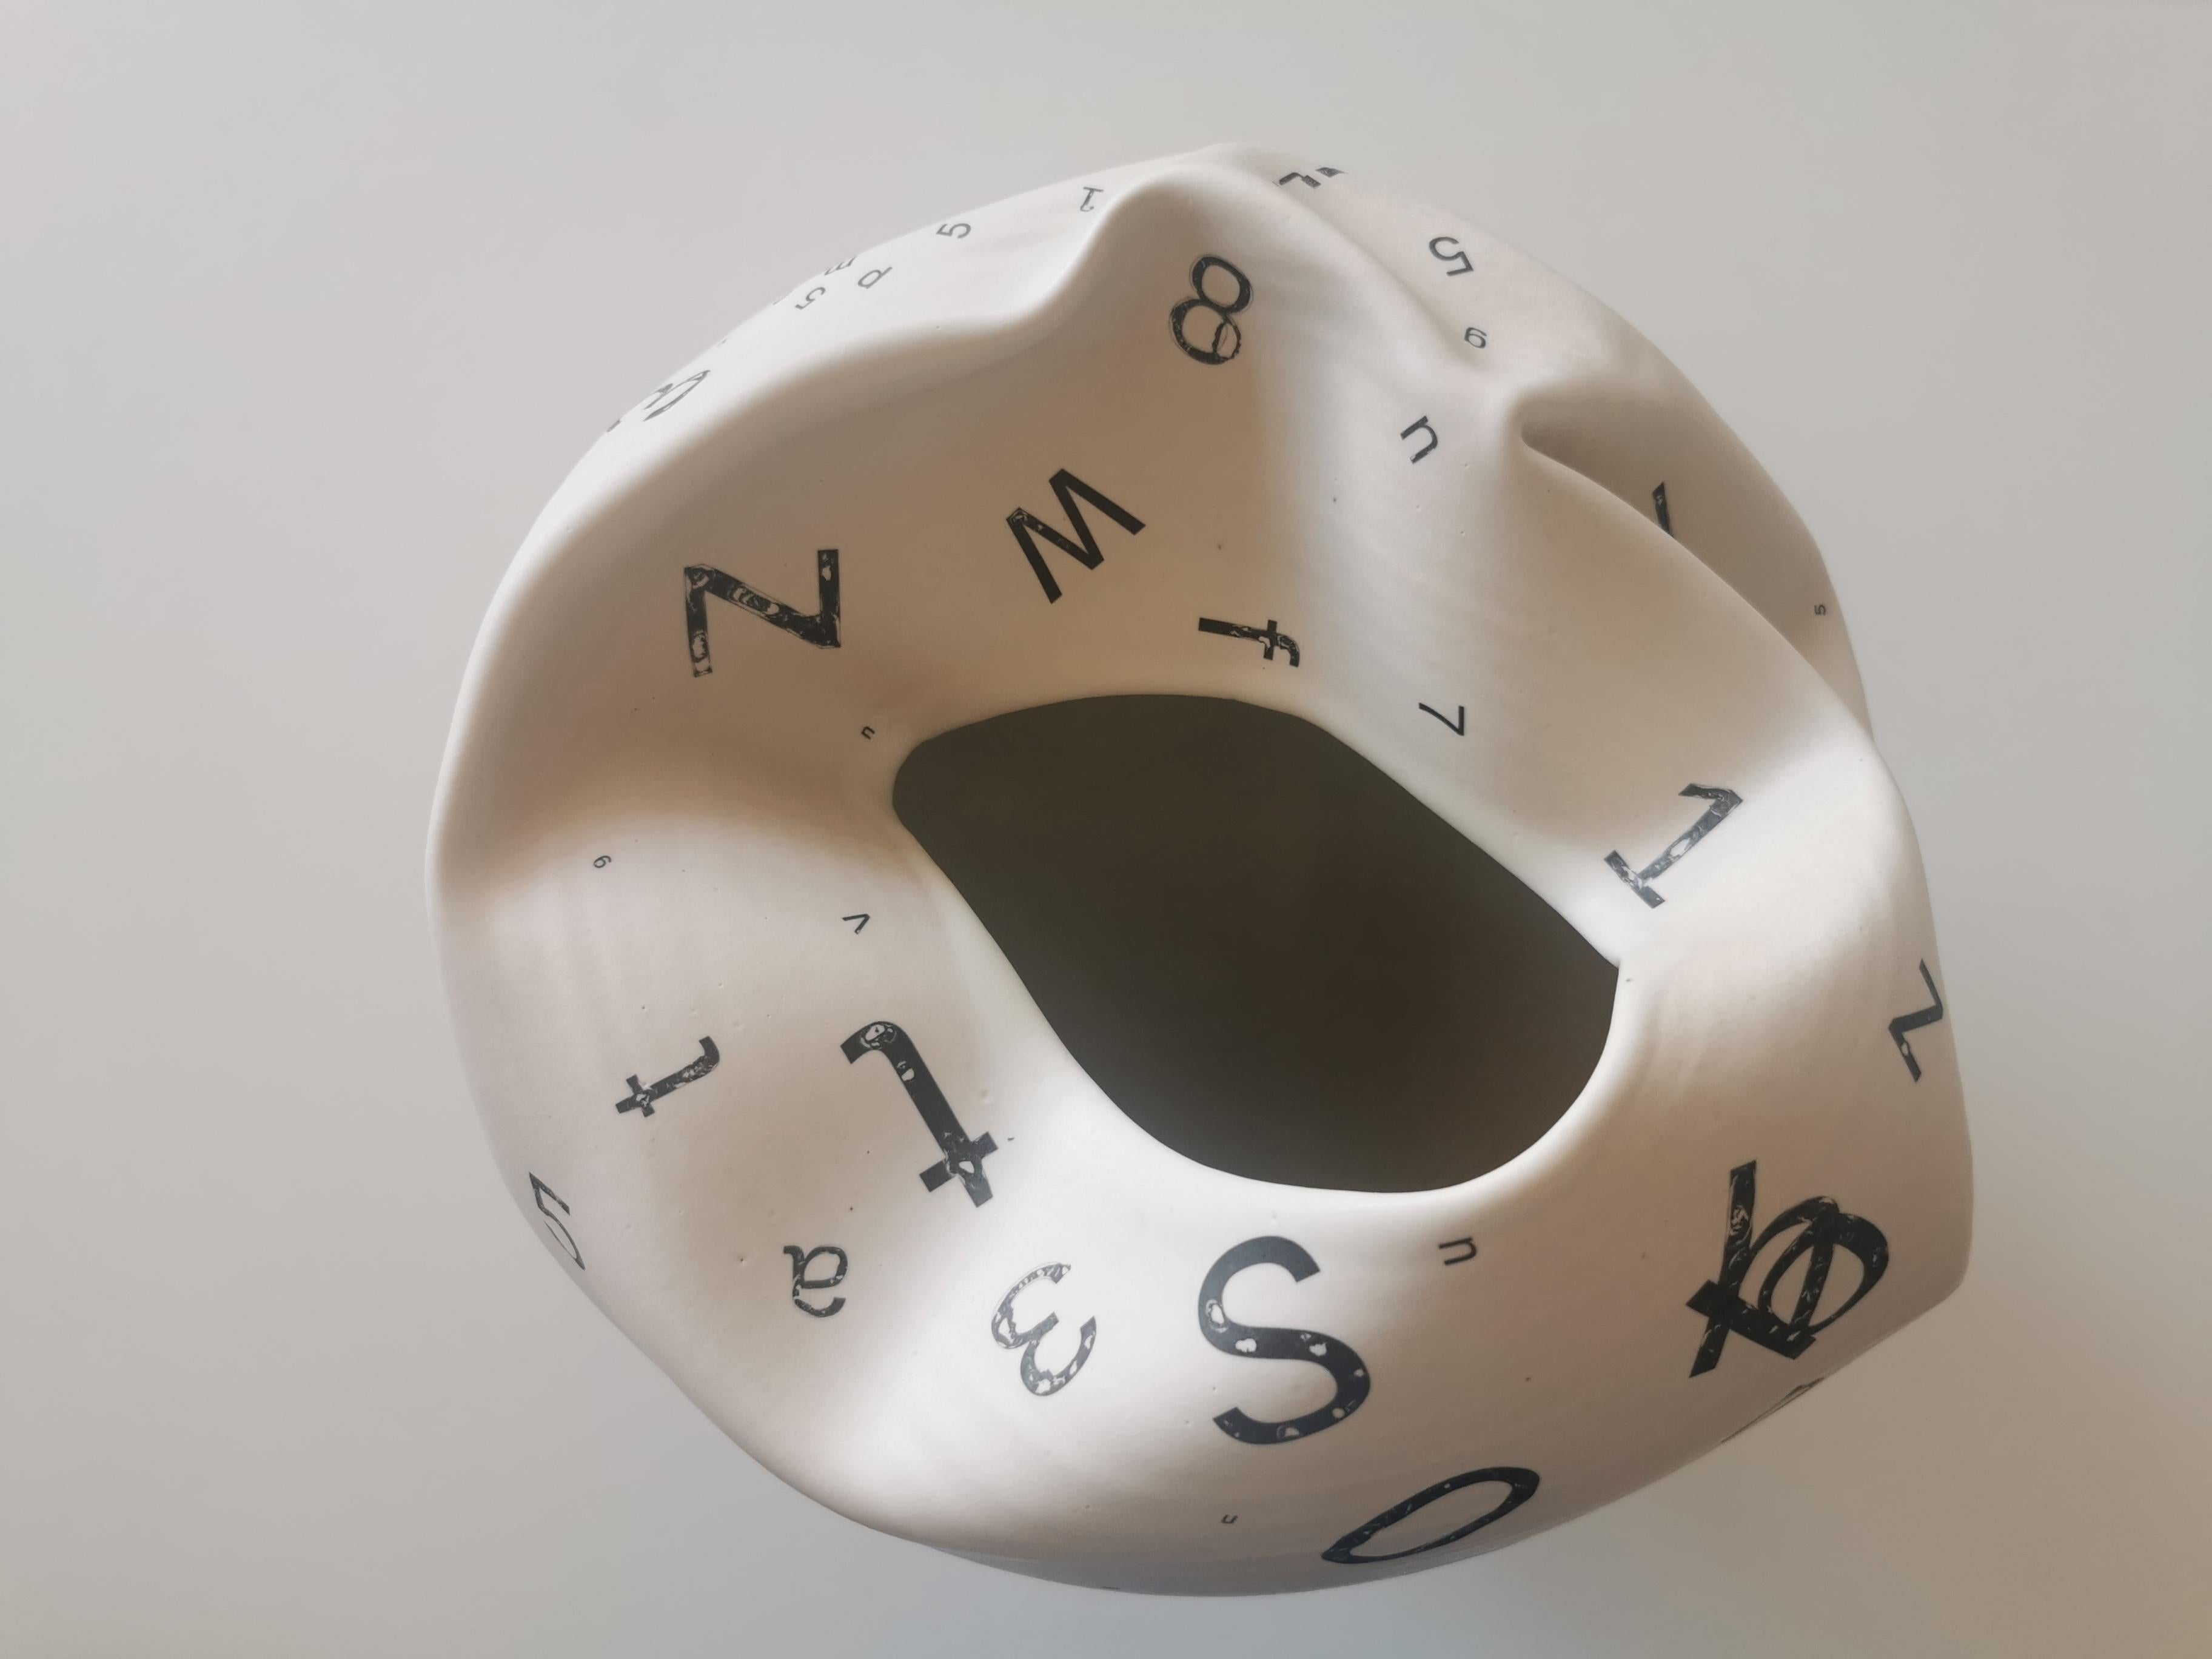 Distorted Form Letters and Numbers N.82, White Clay Ceramic Sculpture, Vessel For Sale 4